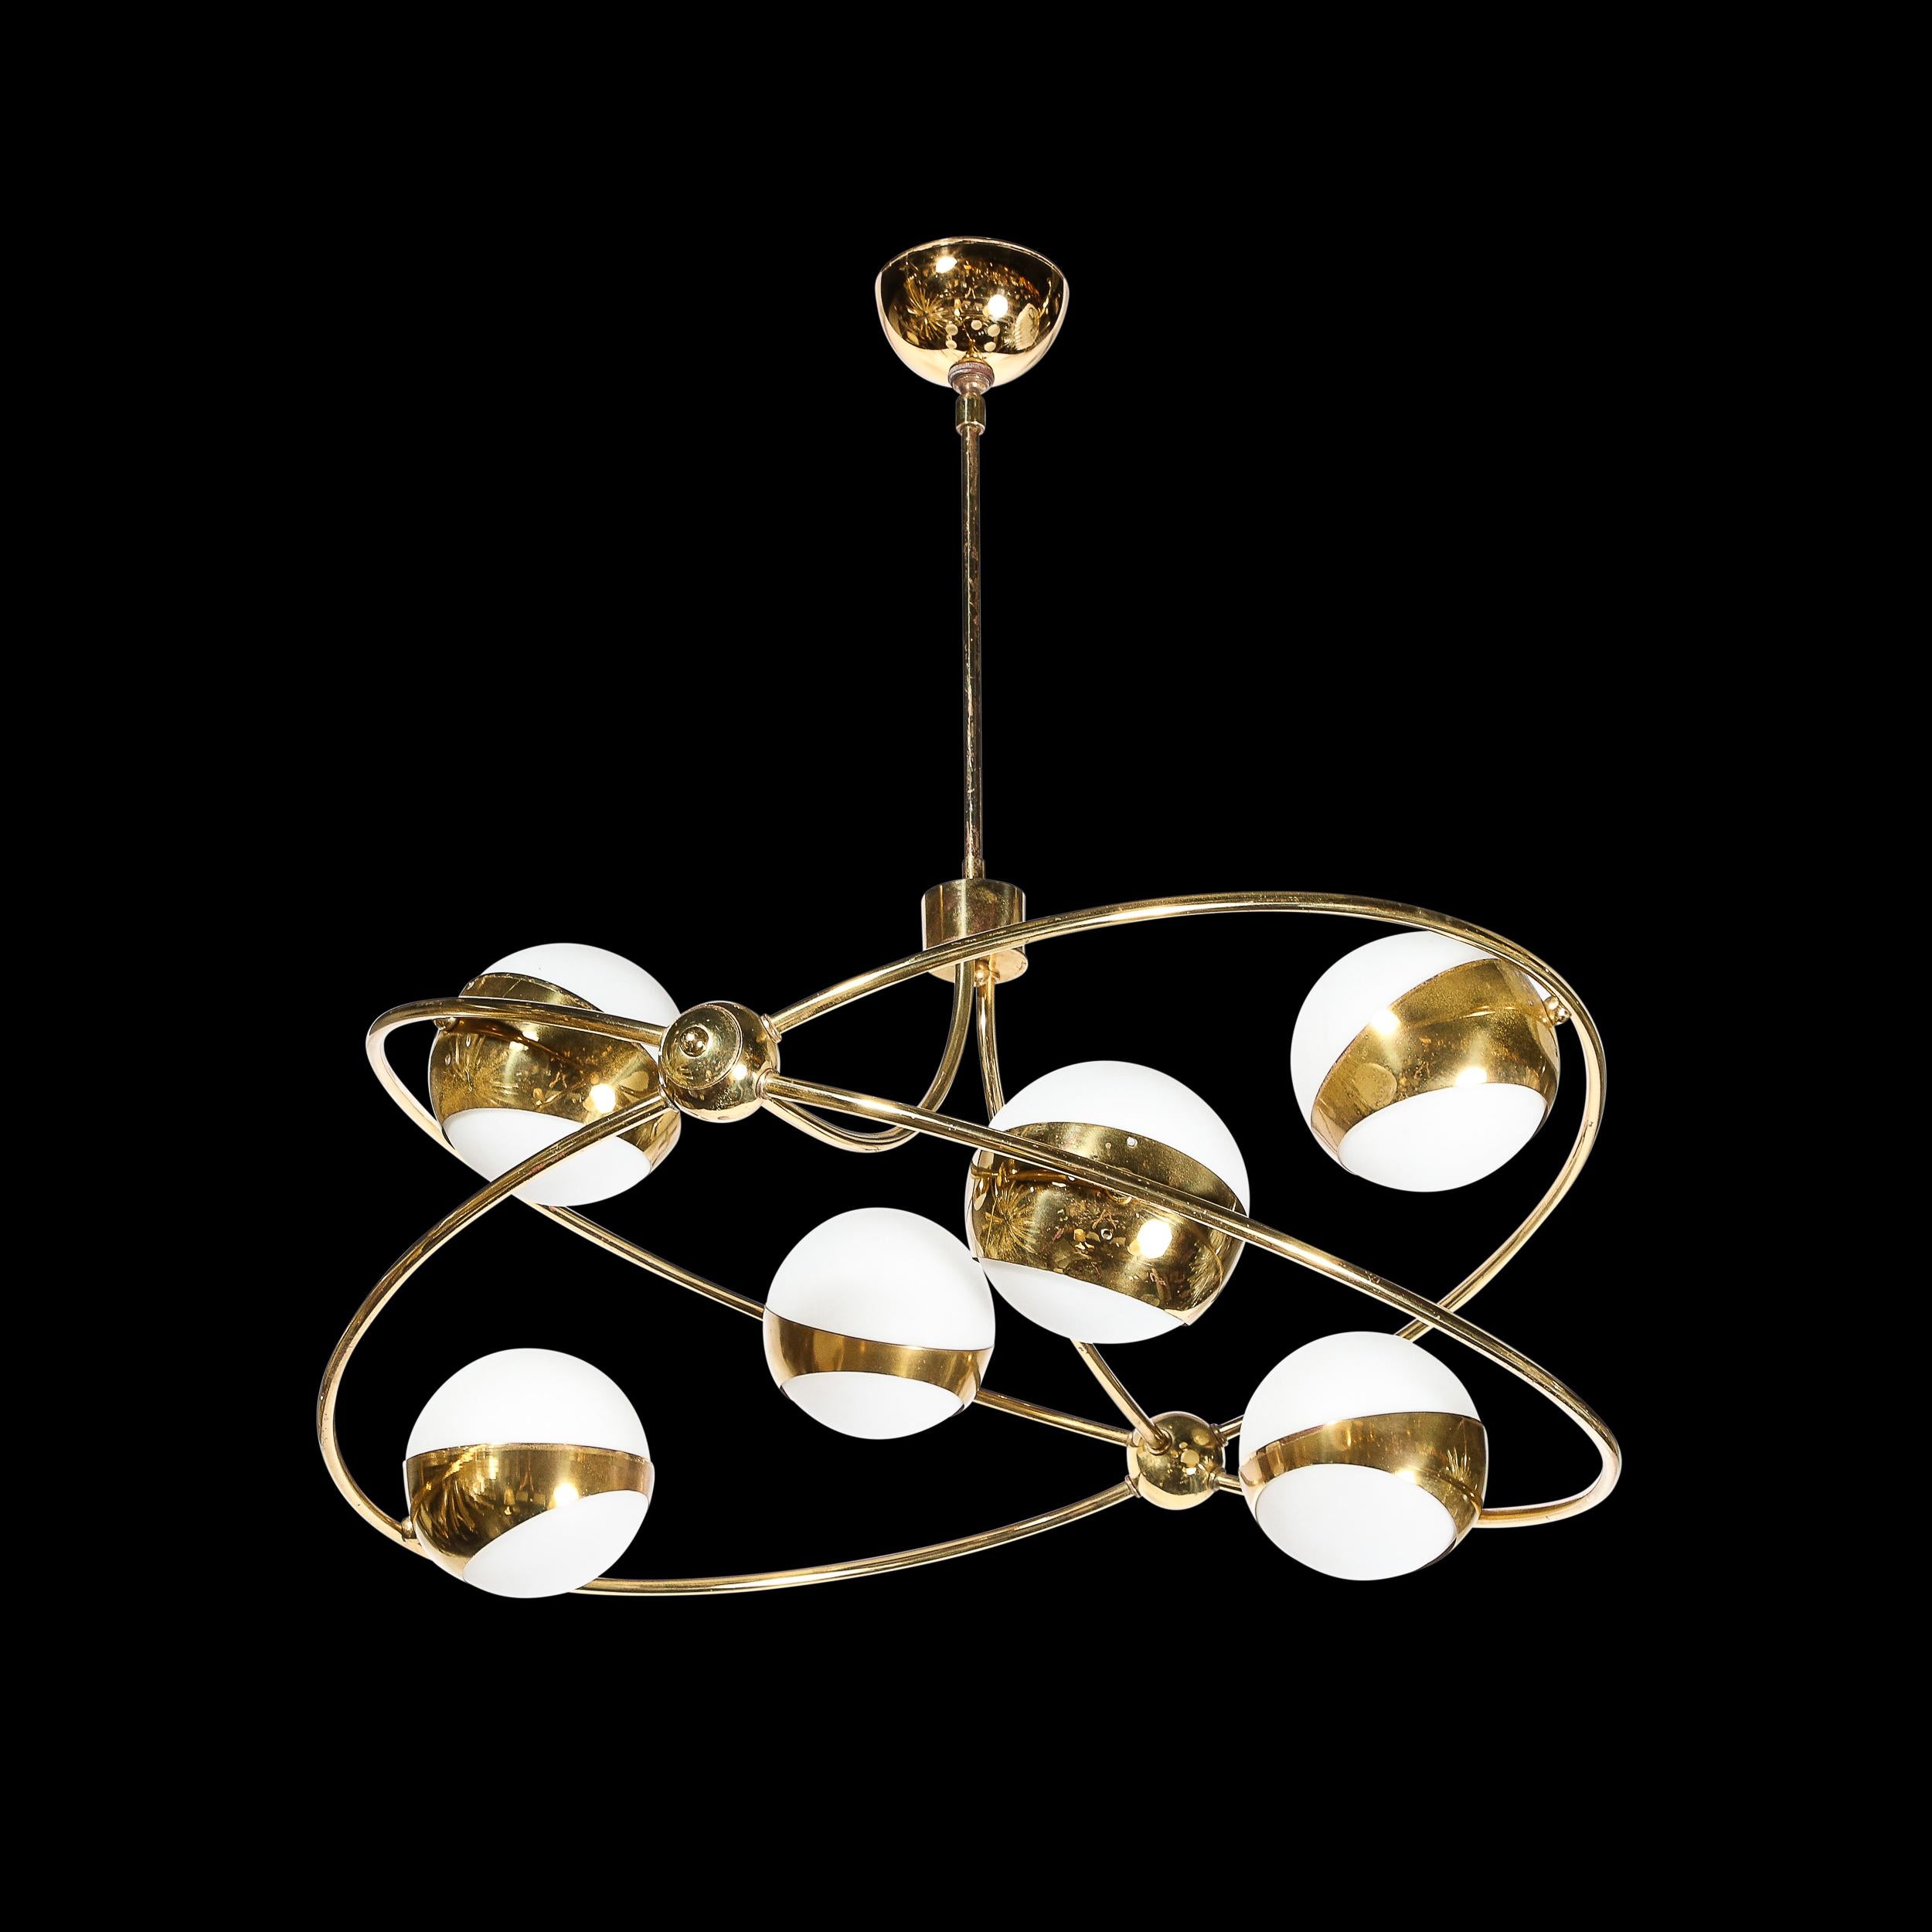 This unique and striking Mid-Century Modernist Elliptical Six Globe Chandelier in Brass and Frosted Glass was created by Stilnovo and originates from Italy, Circa 1950. Featuring a gleaming bass framework of two elliptical elements joined where they